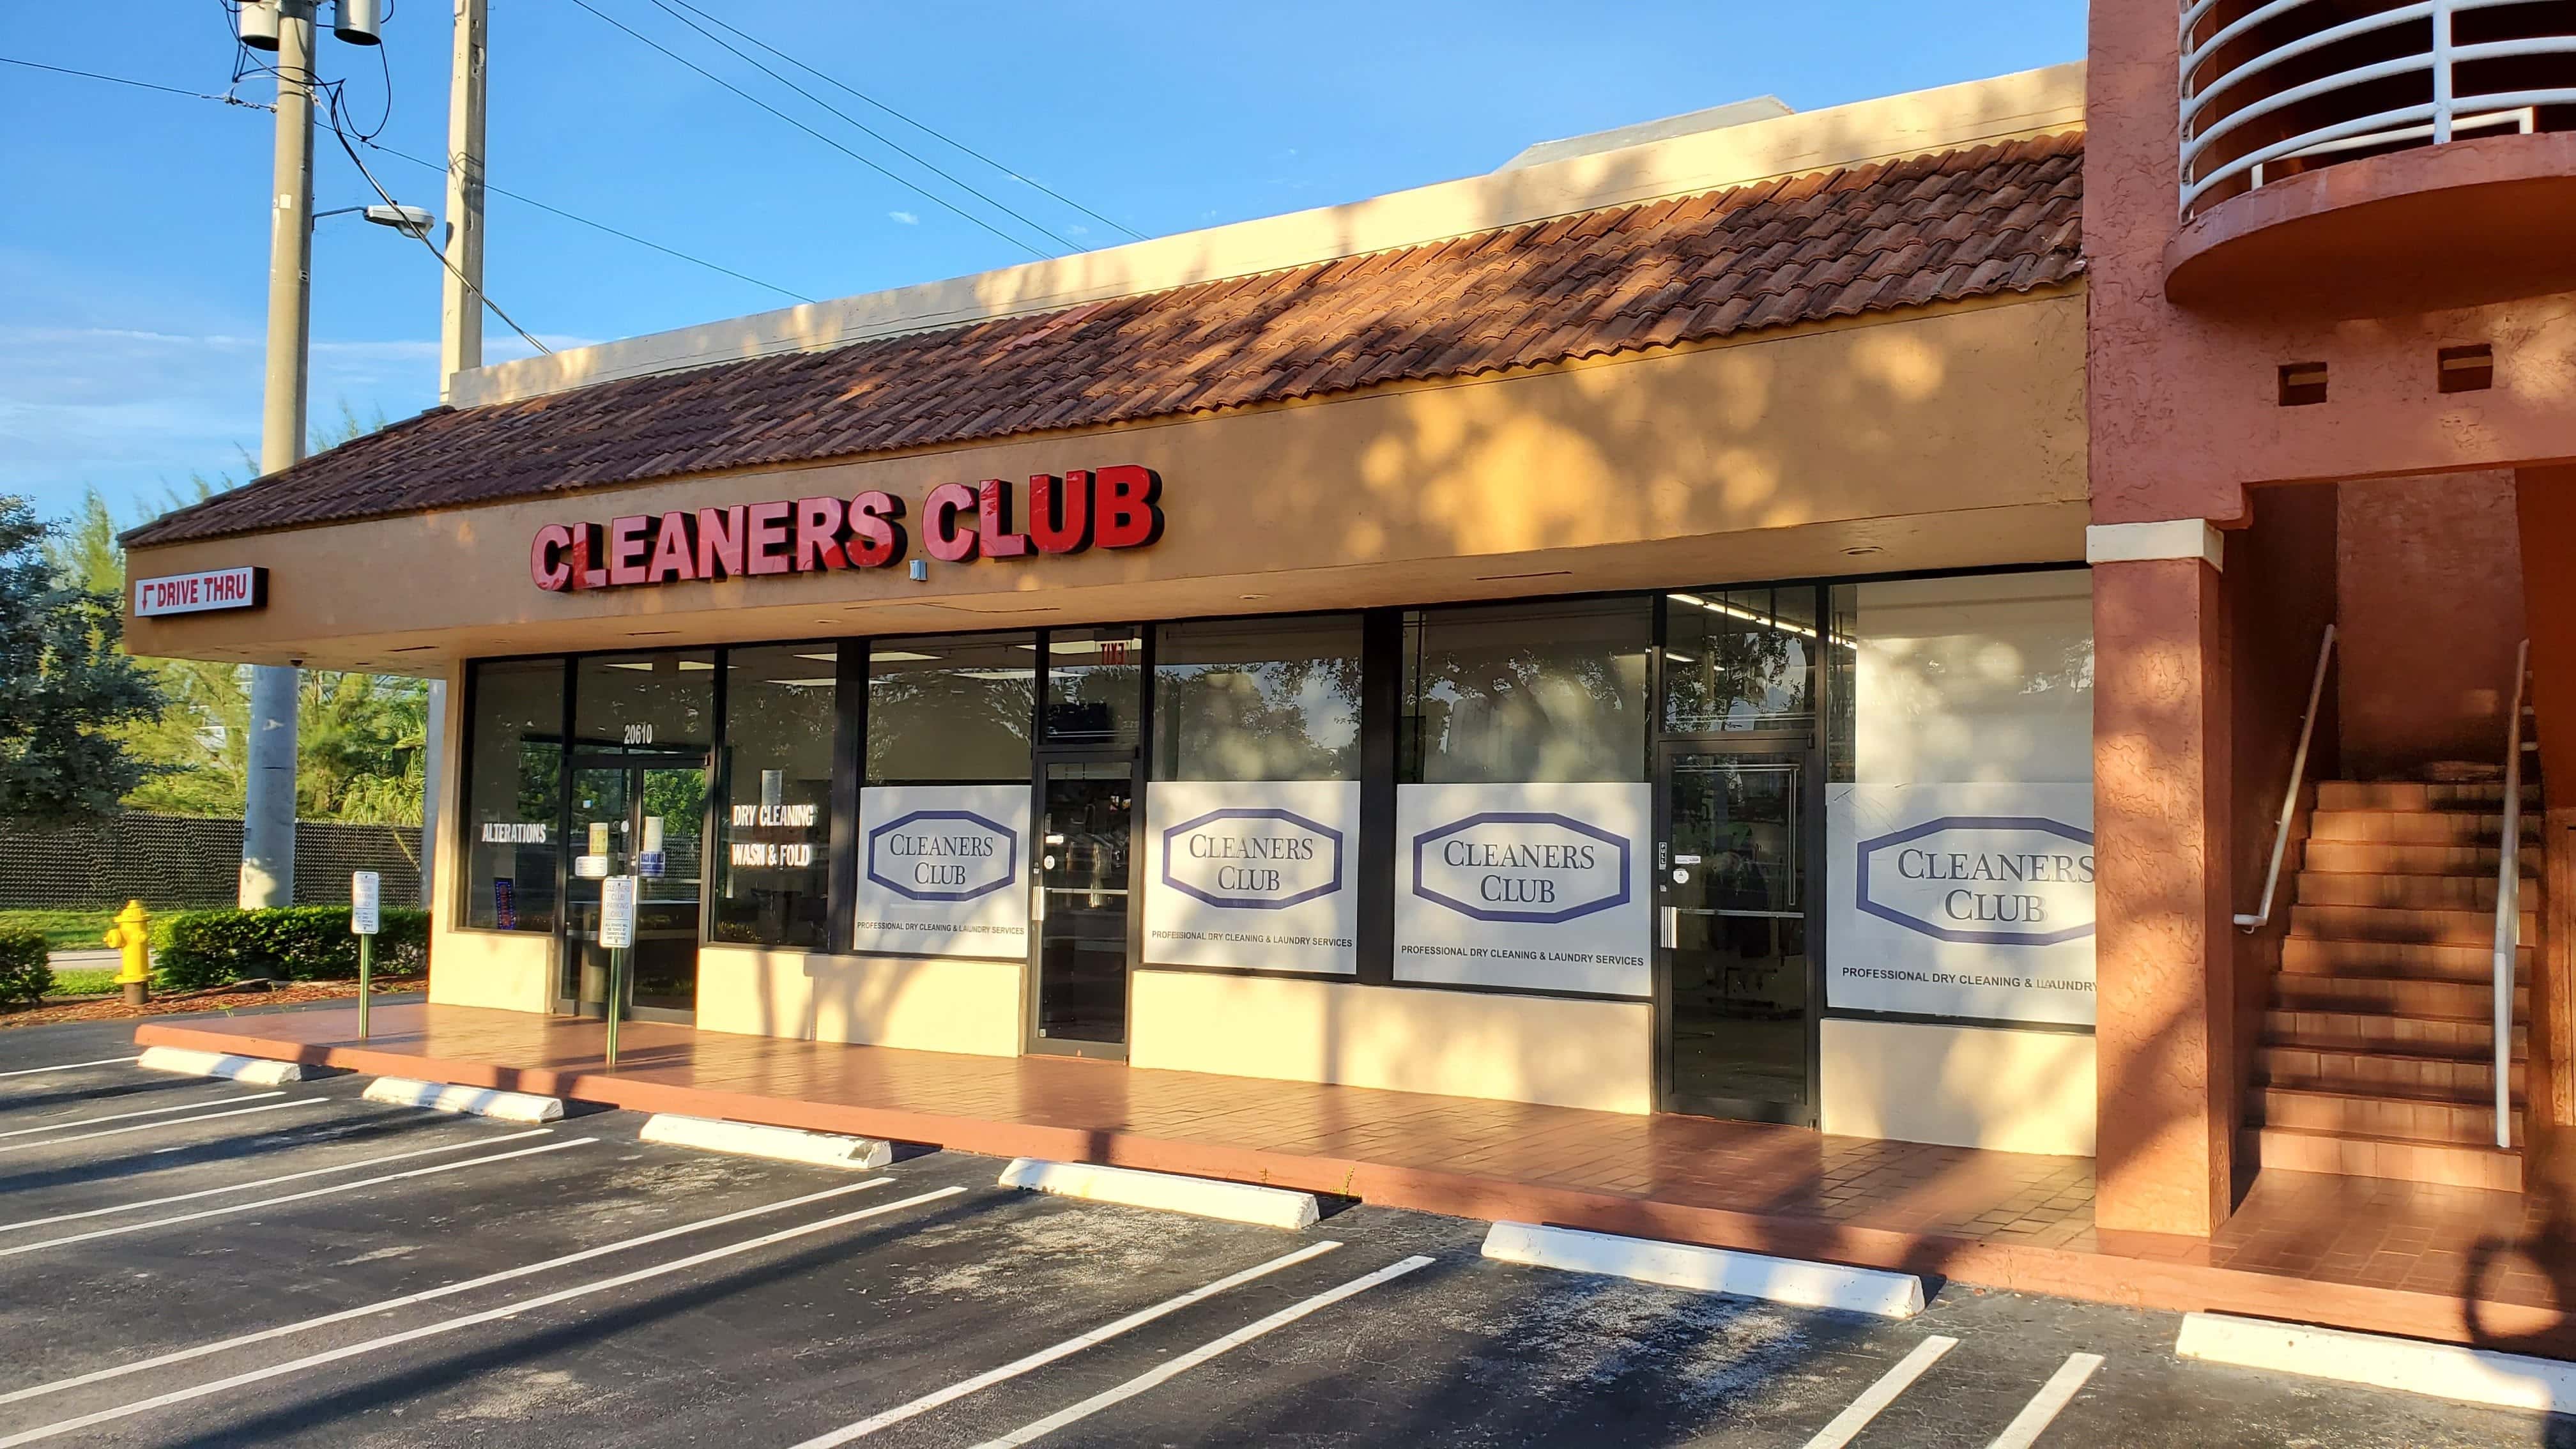 Cleaners Club USA - Miami, FL, US, 24 hour dry cleaners